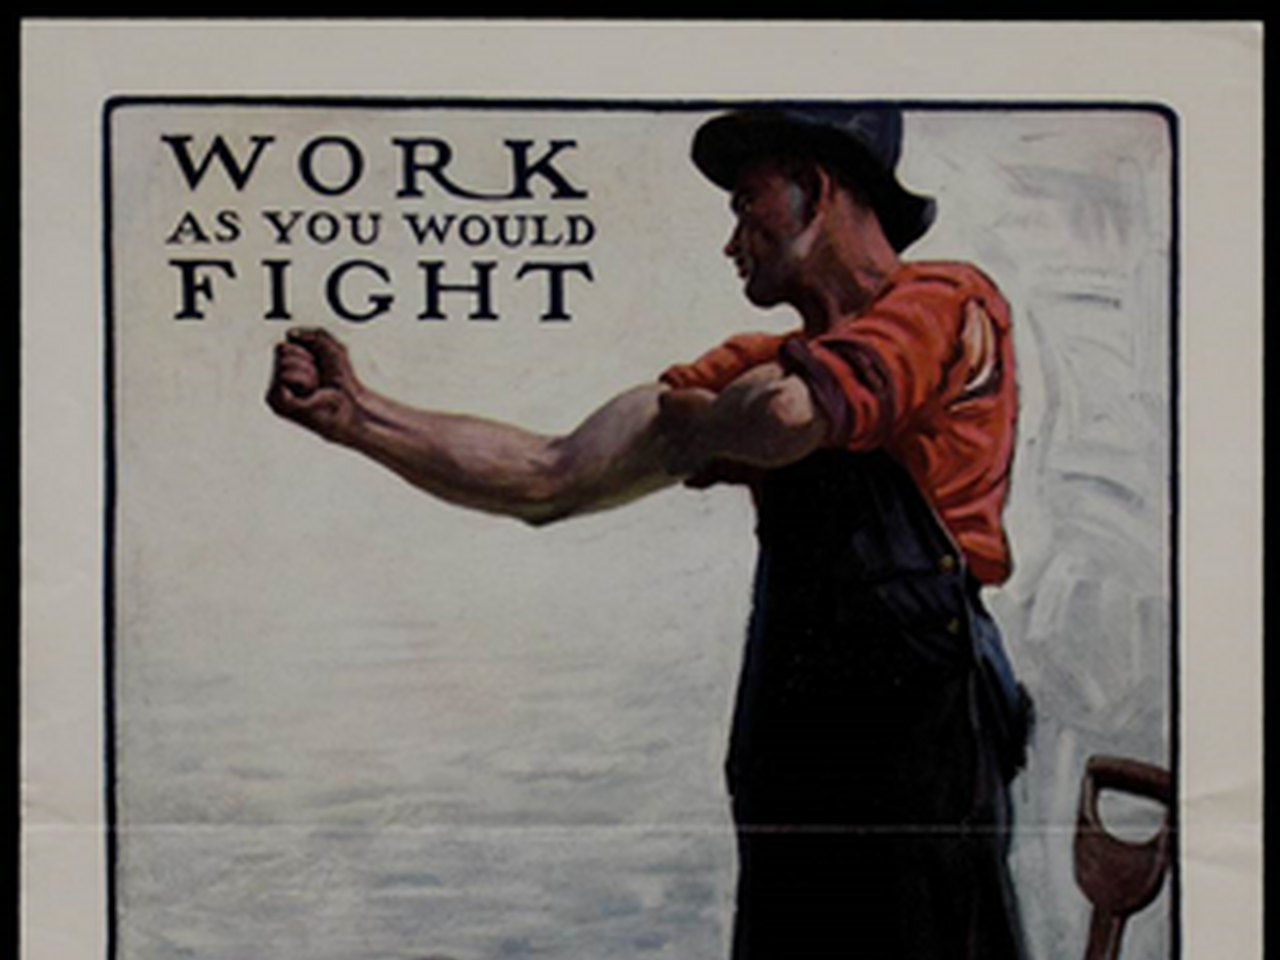 Poster with text "Work as you would fight"